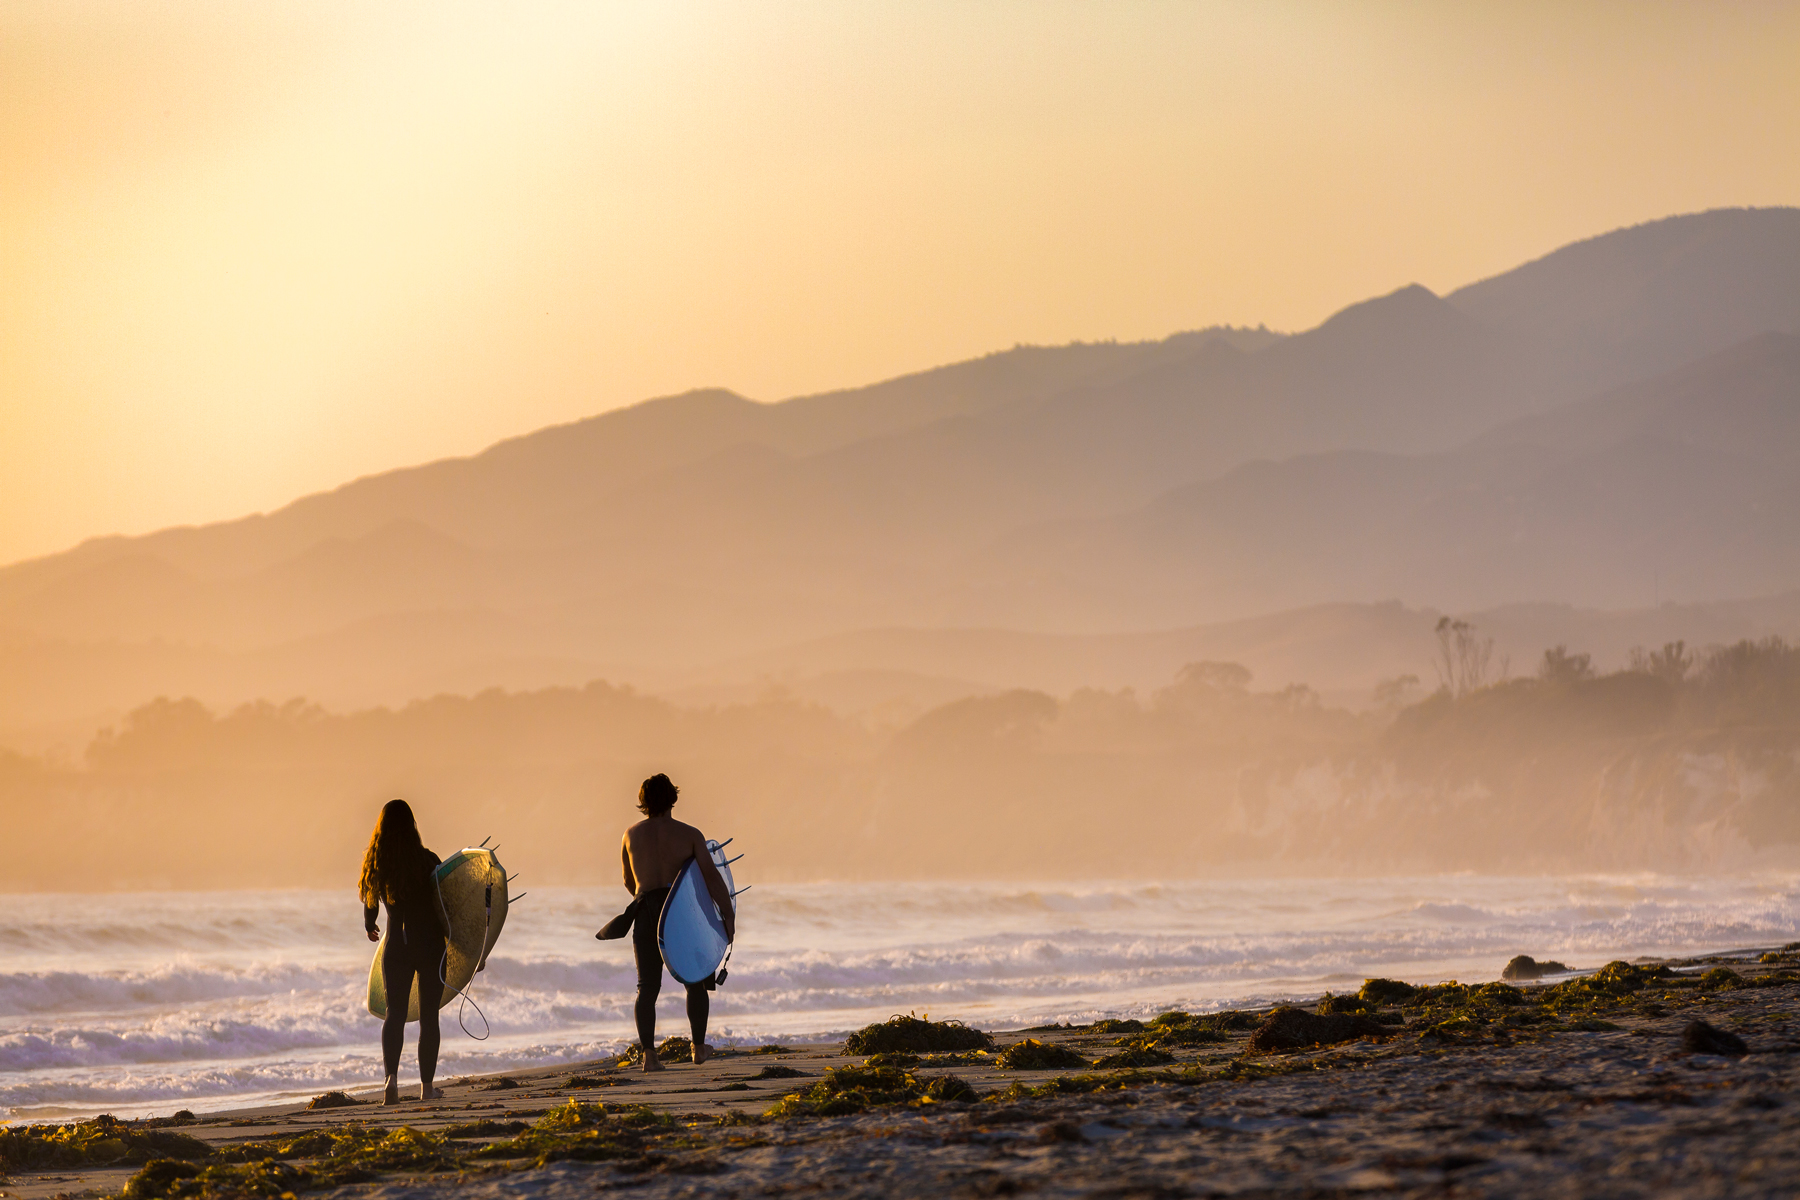 Two surfers walking along the beach at sunset with mountains in the background